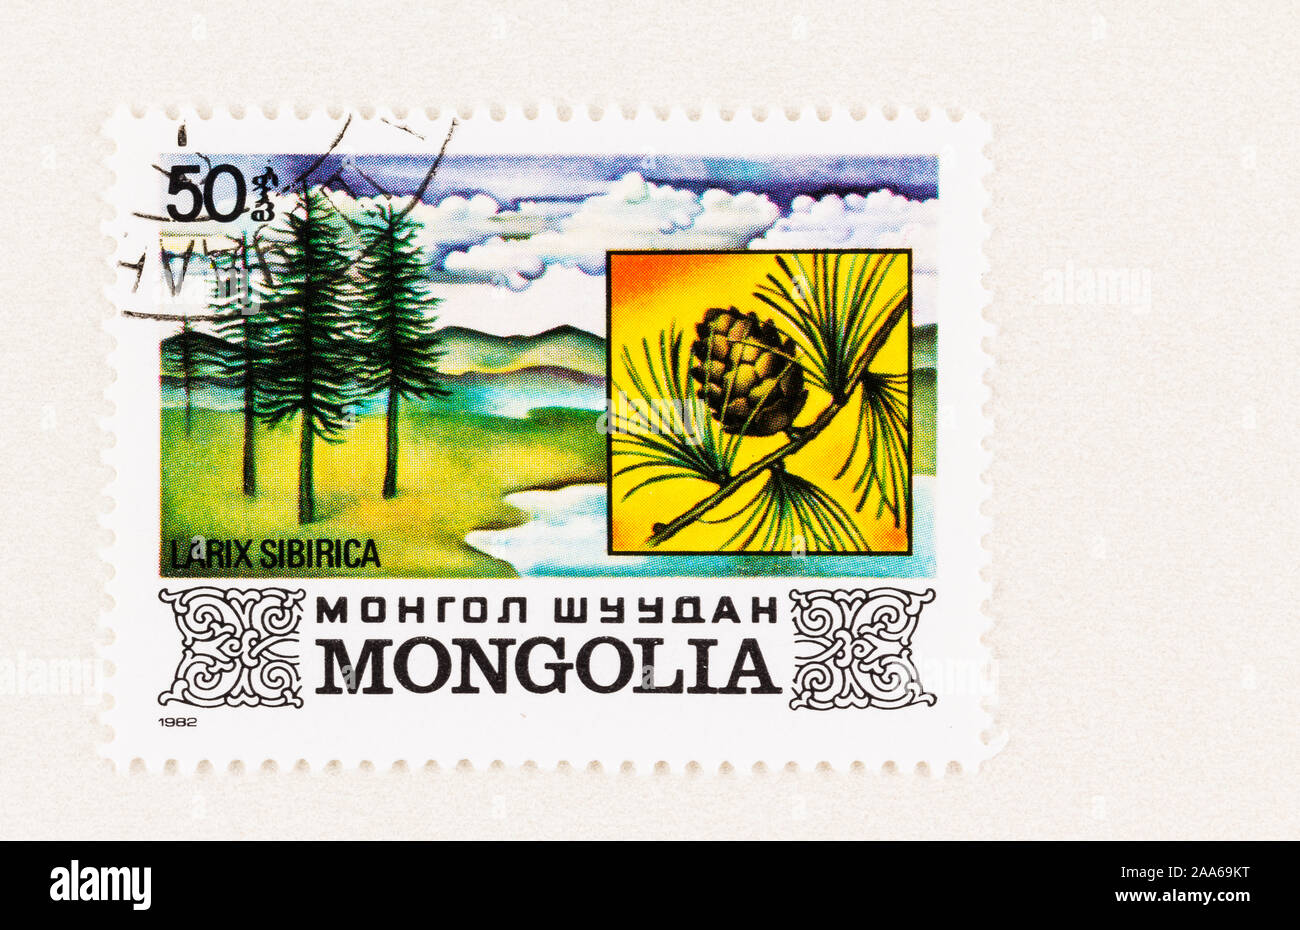 SEATTLE WASHINGTON - October 5, 2019: Mongolia postage stamp featuring native deciduous Siberian Larch with close up cone detail. Stock Photo